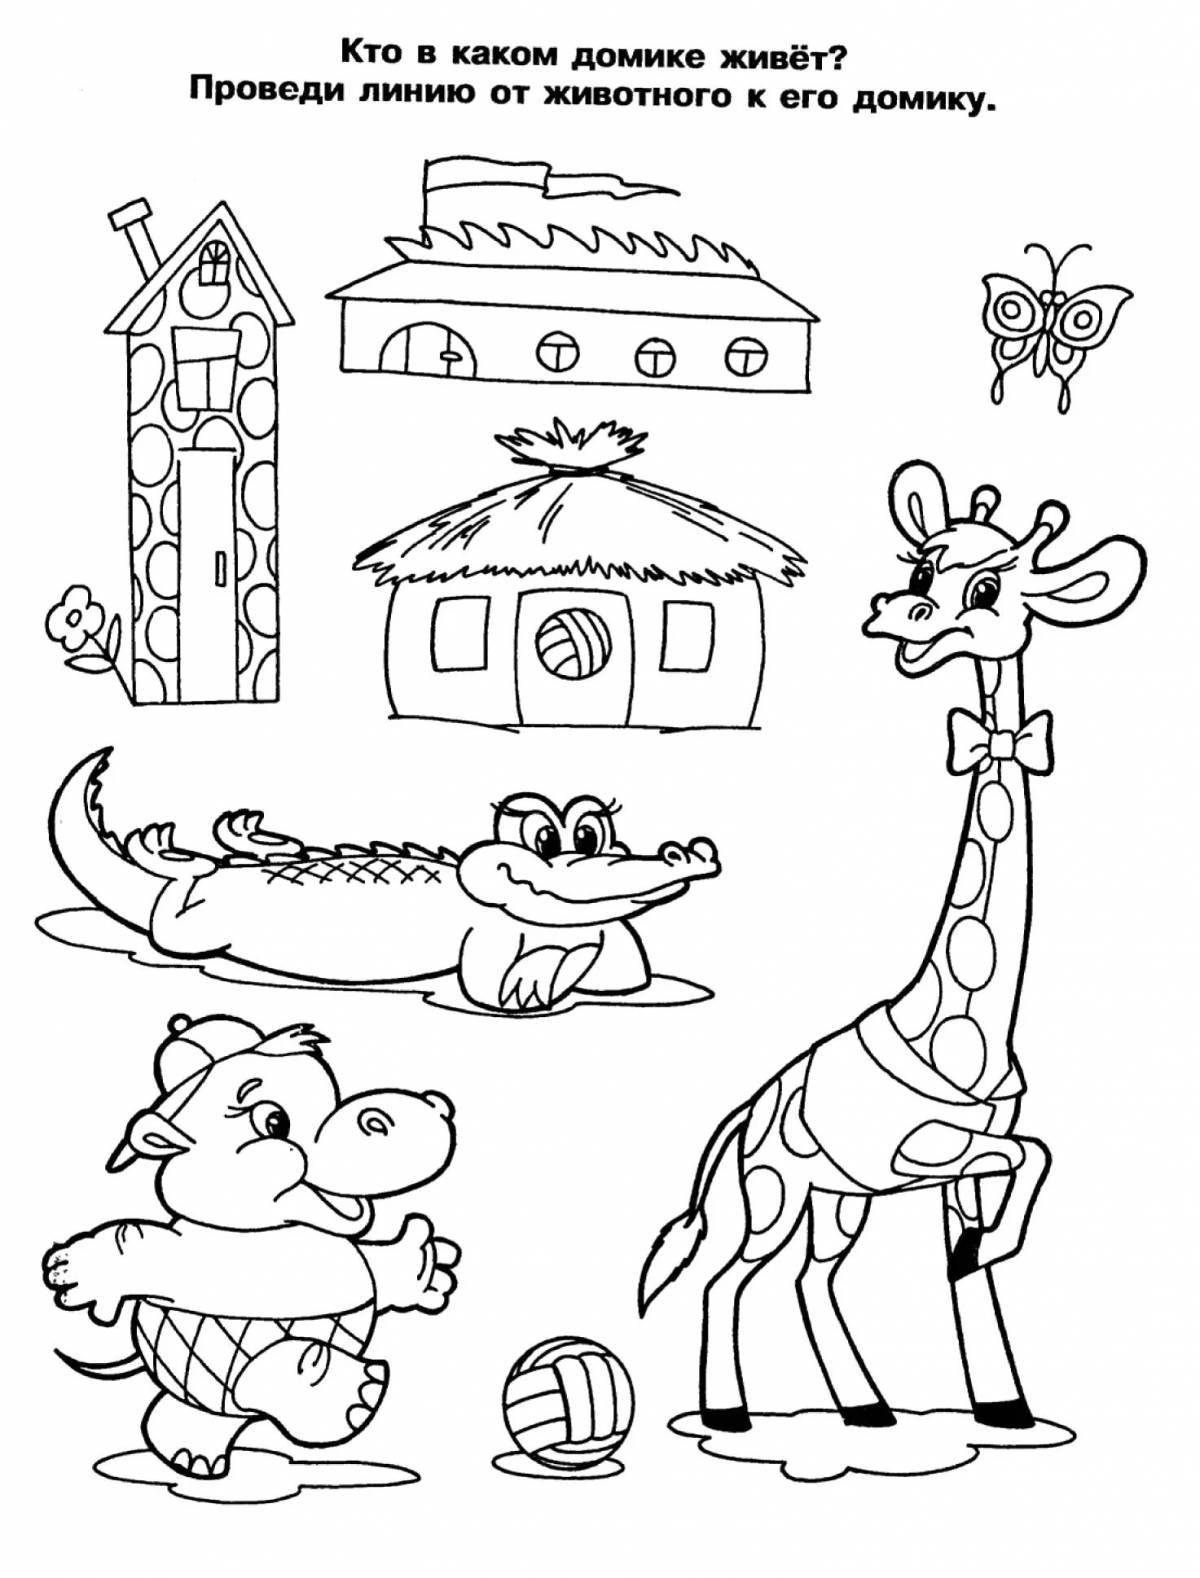 Innovative coloring book for learning and development of children 4-5 years old